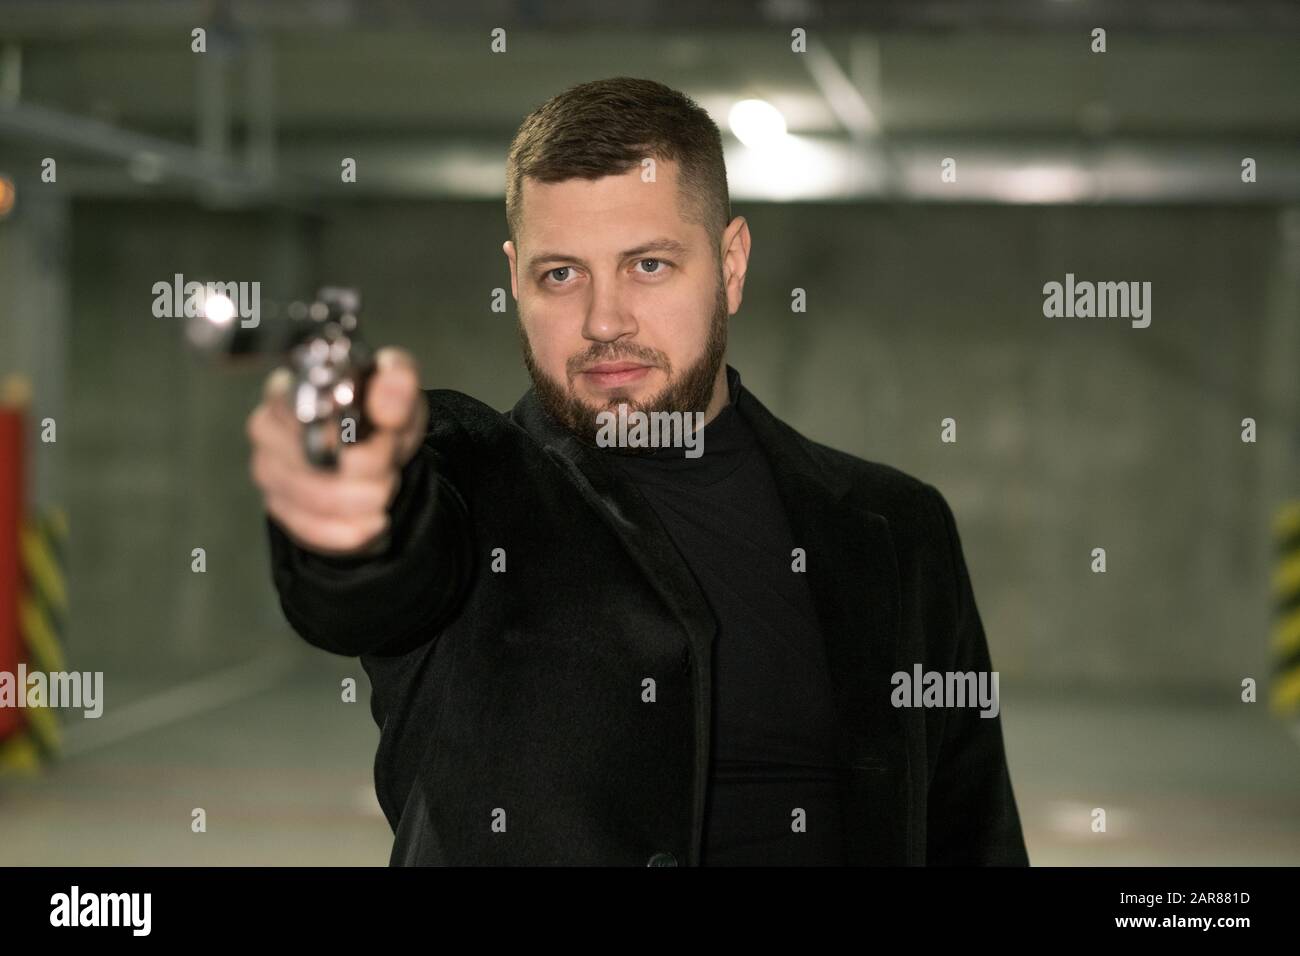 Young killer or agent in black jacket and t-shirt directing handgun on victim Stock Photo